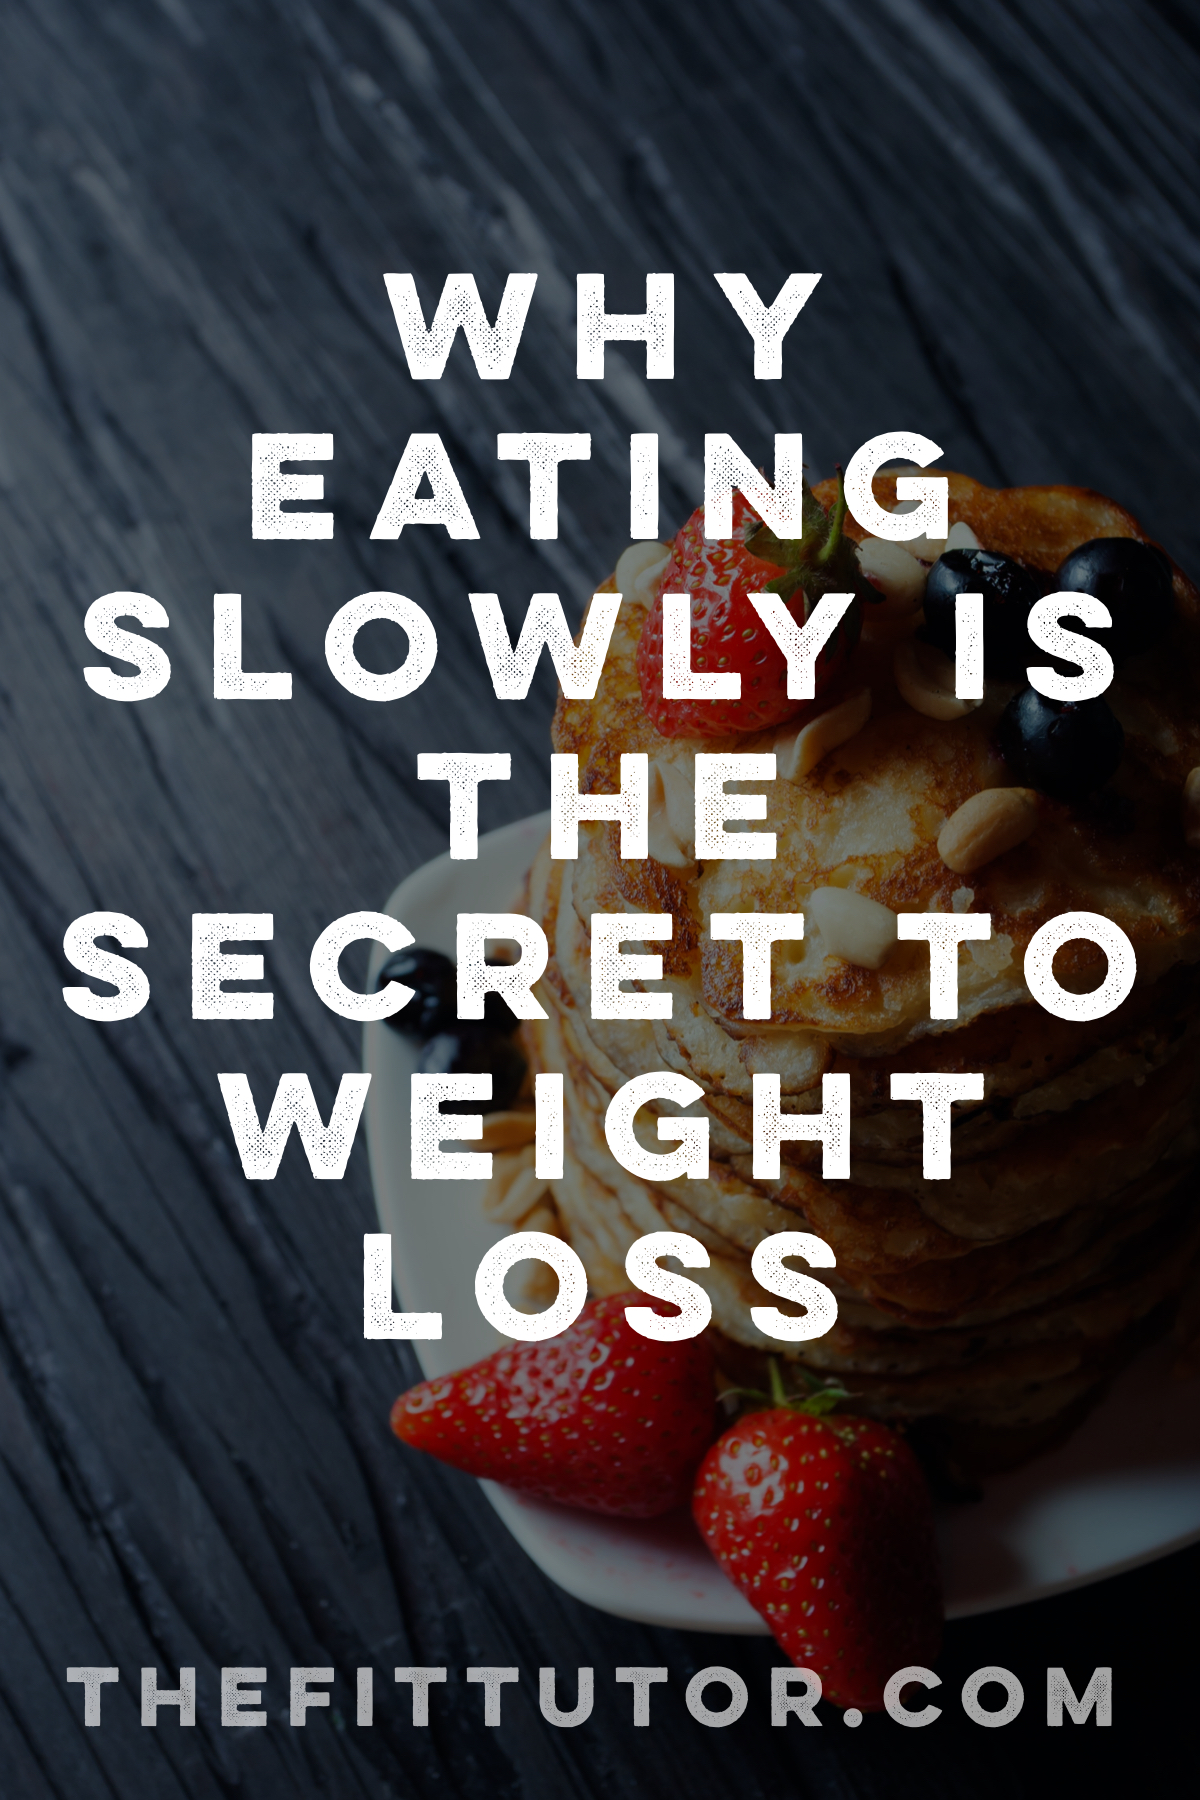 learning to eat slowly is the first step in losing weight. Find out how and why here!